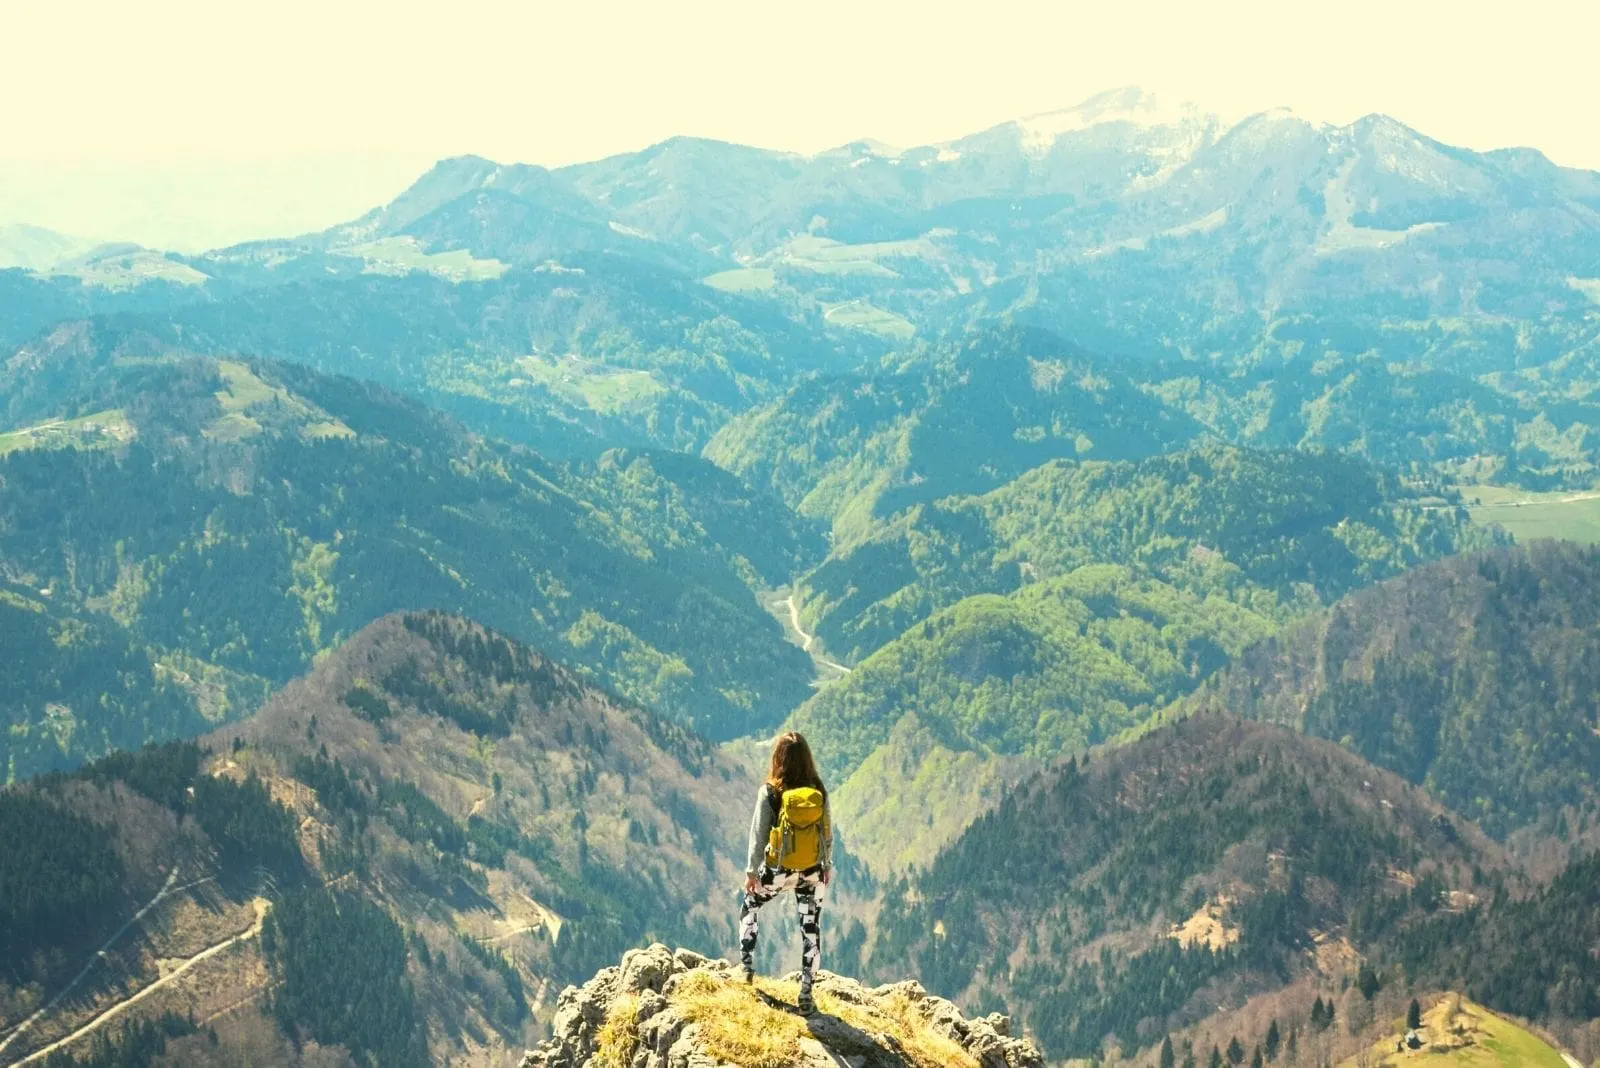 woman standing at the mountain top looking over the mountain ranges in very distant view